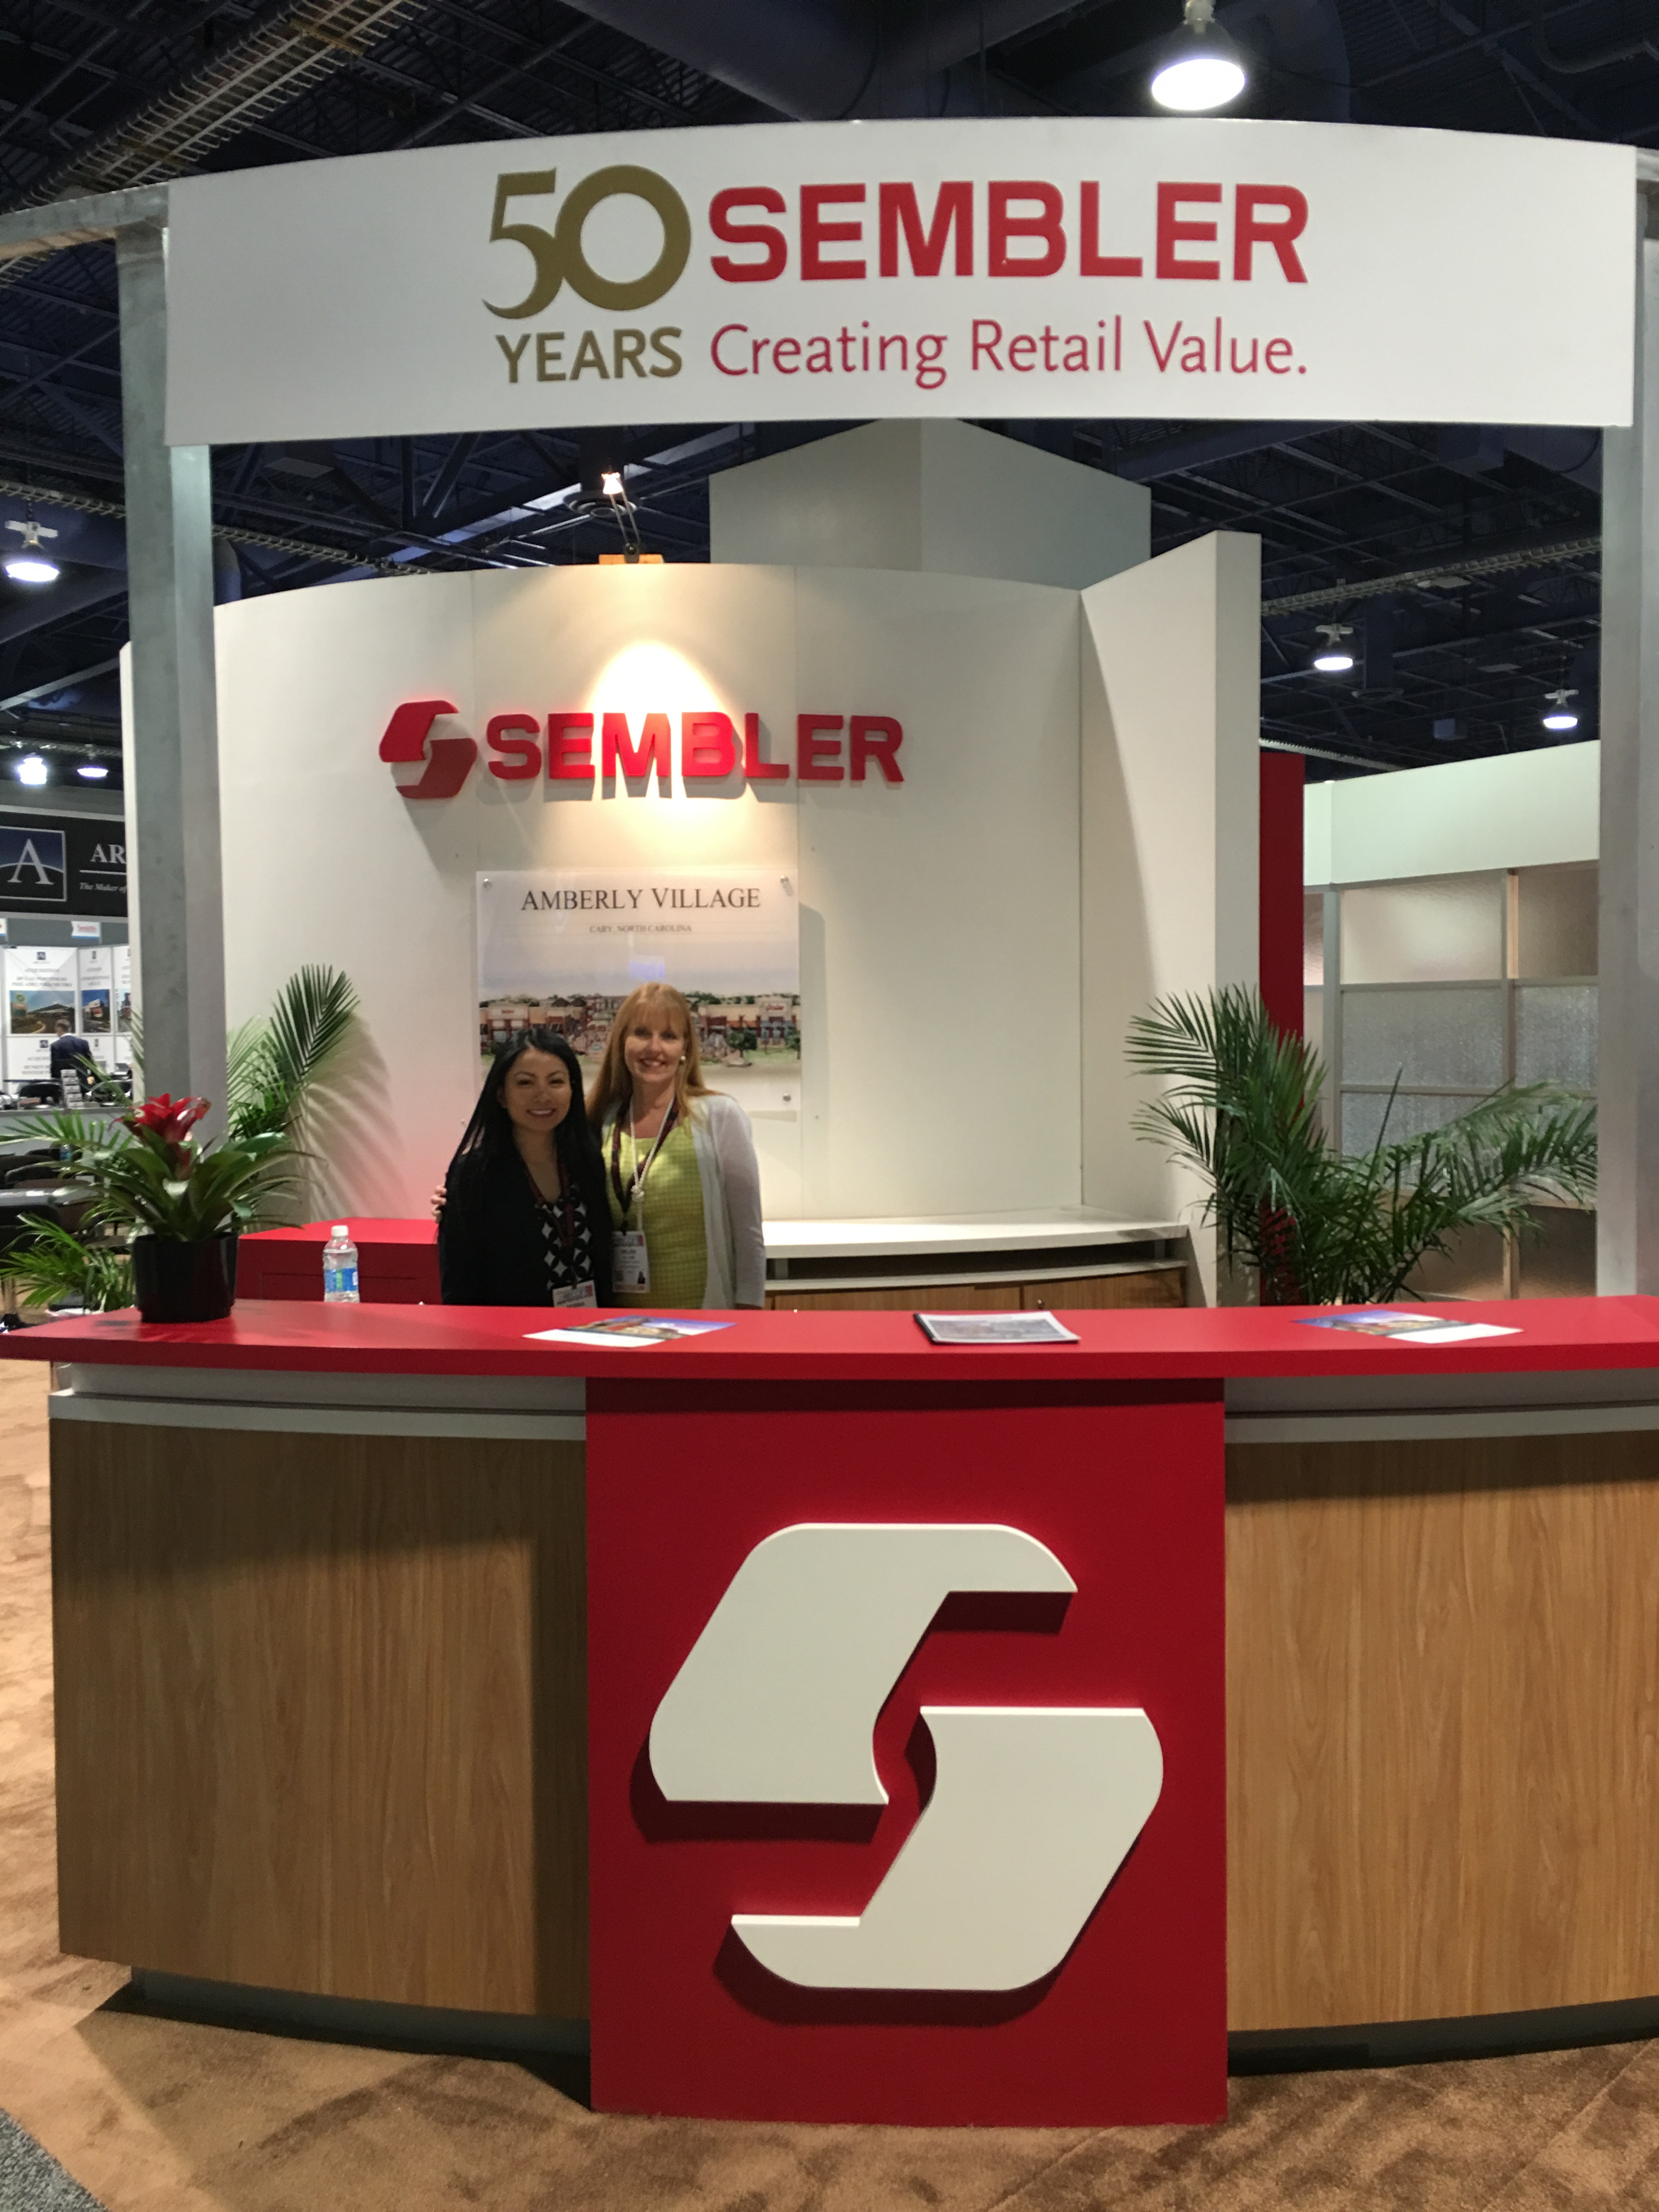 Sembler 2016, Year in Review